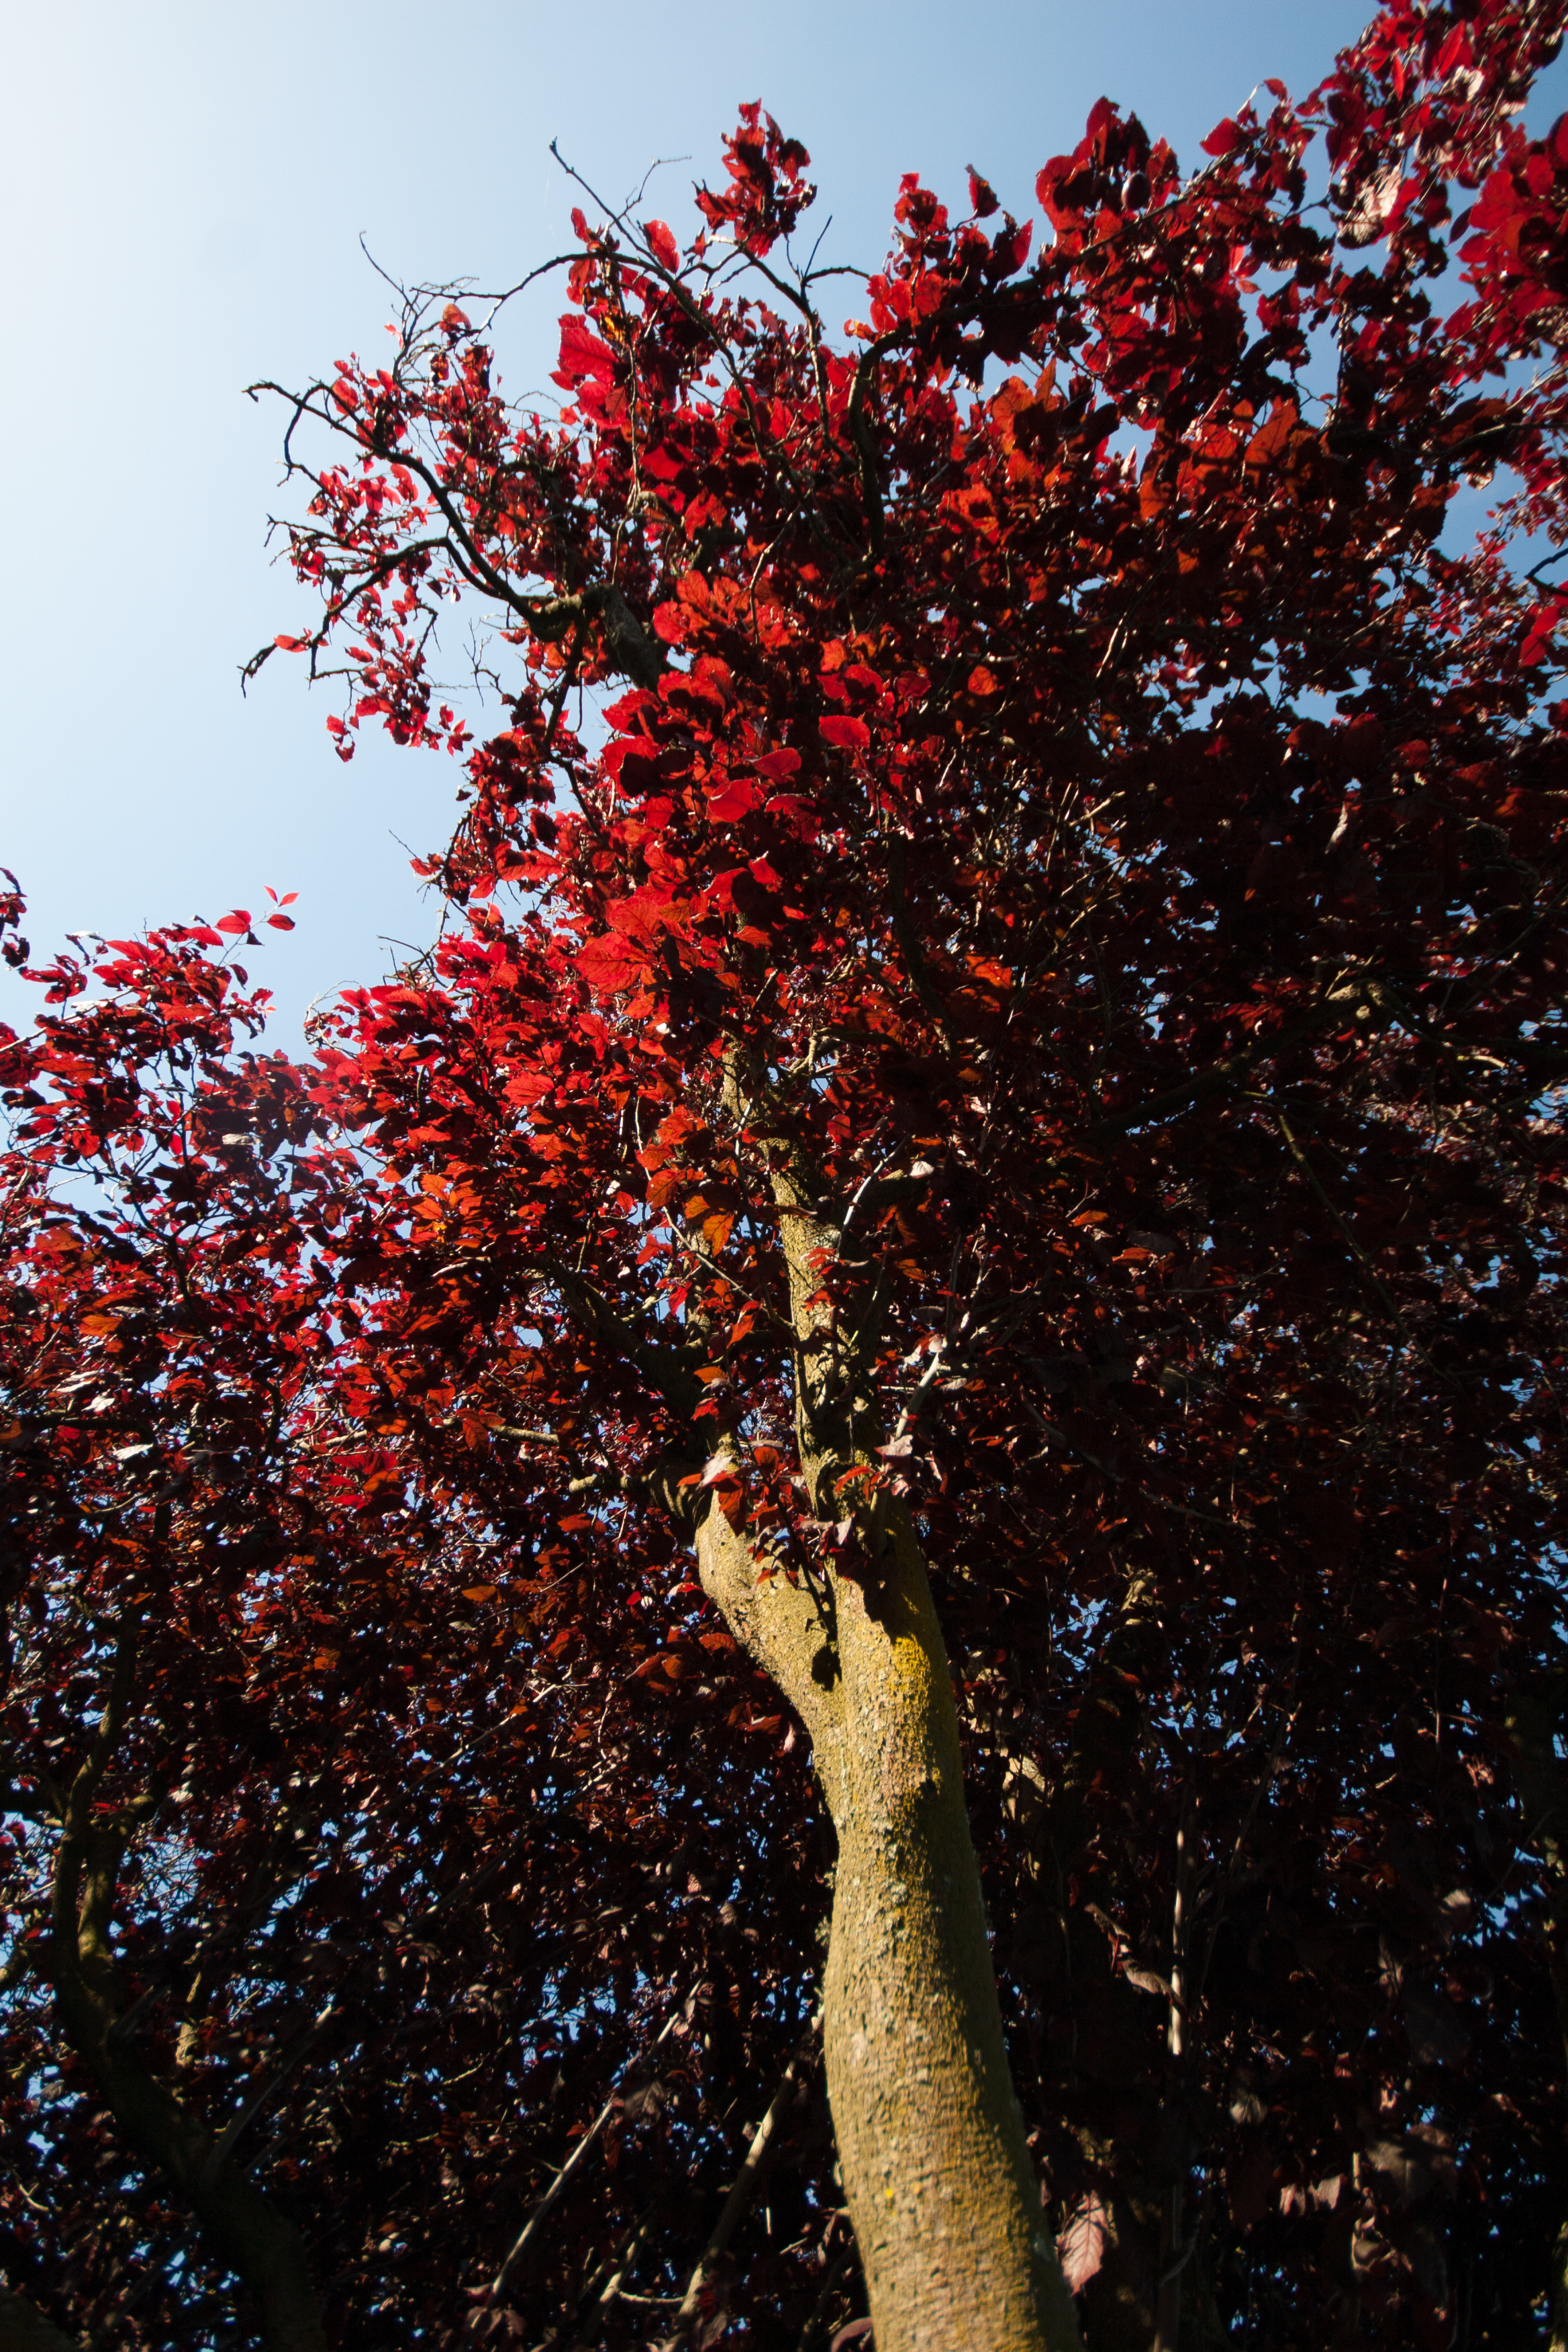 trees red leaves lit up by the sun glowing red